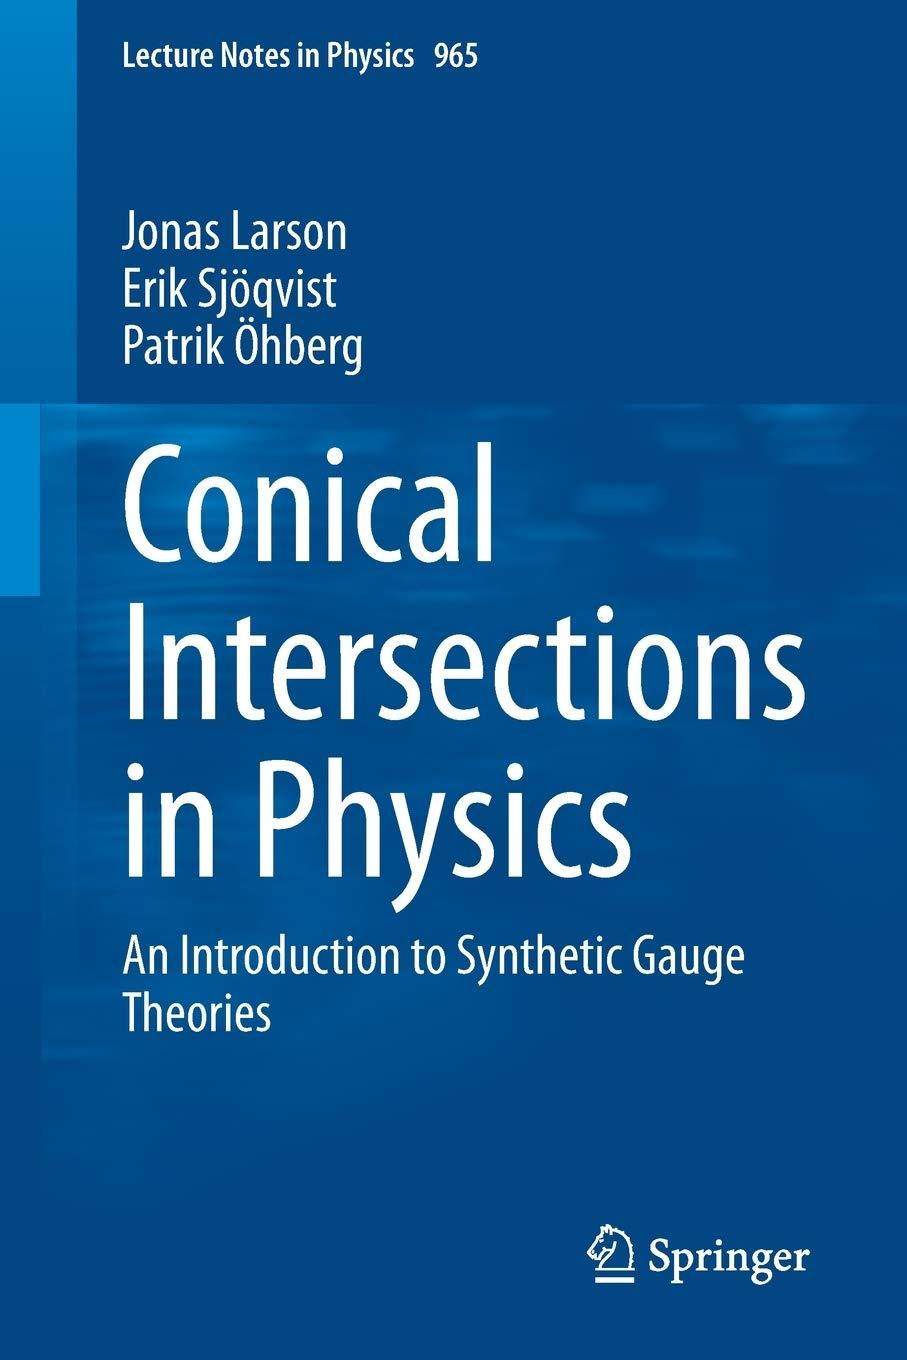 conical intersections in physics an introduction to synthetic gauge theories 1st edition jonas larson, erik